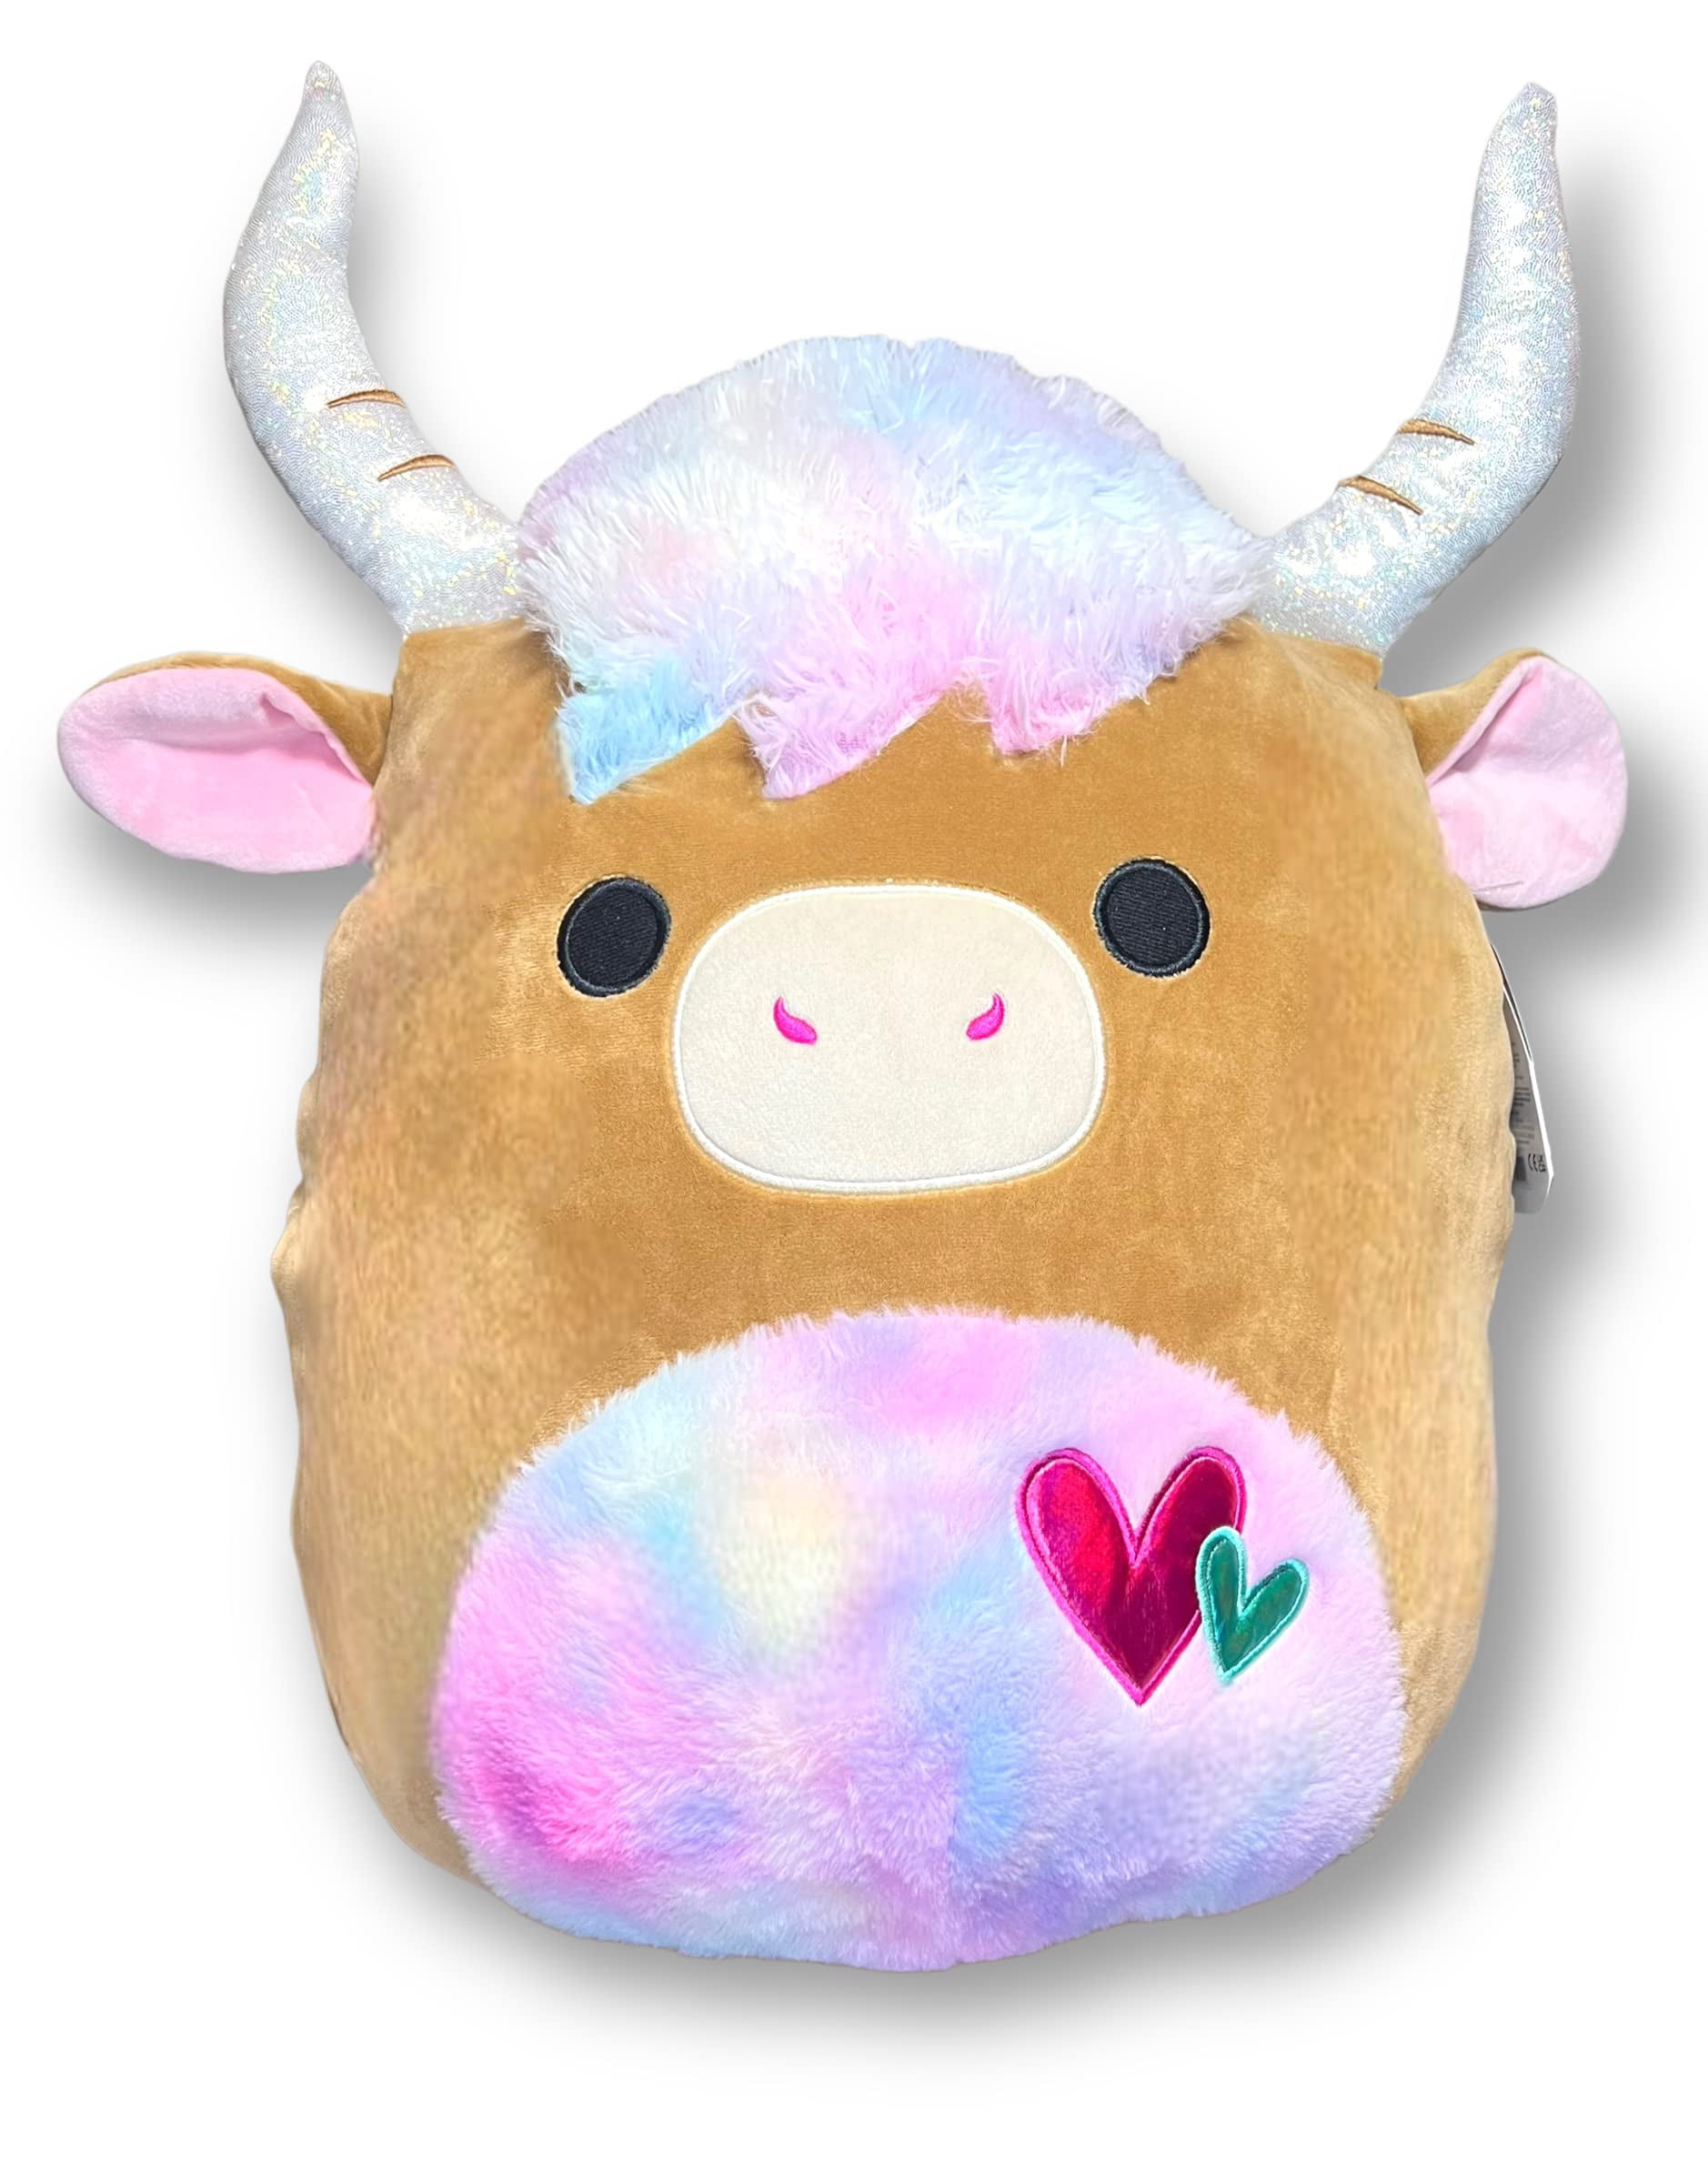 Highland Cow Plush Heal Your Mood Cow Stuffed Toy - roargift